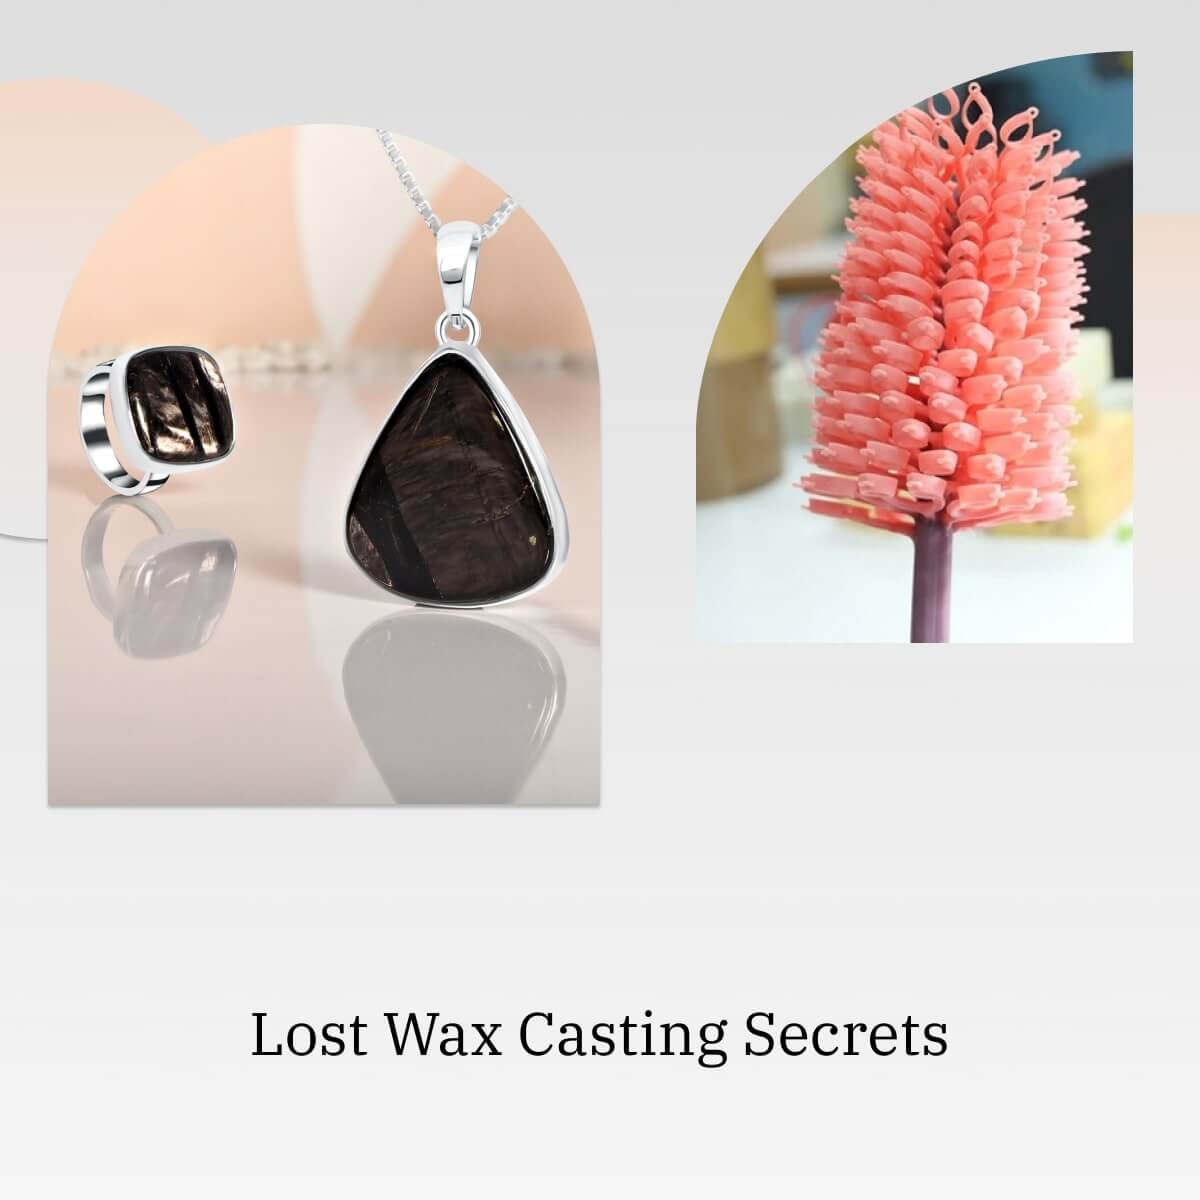 The Lost Wax Casting Guide: Definition & Process